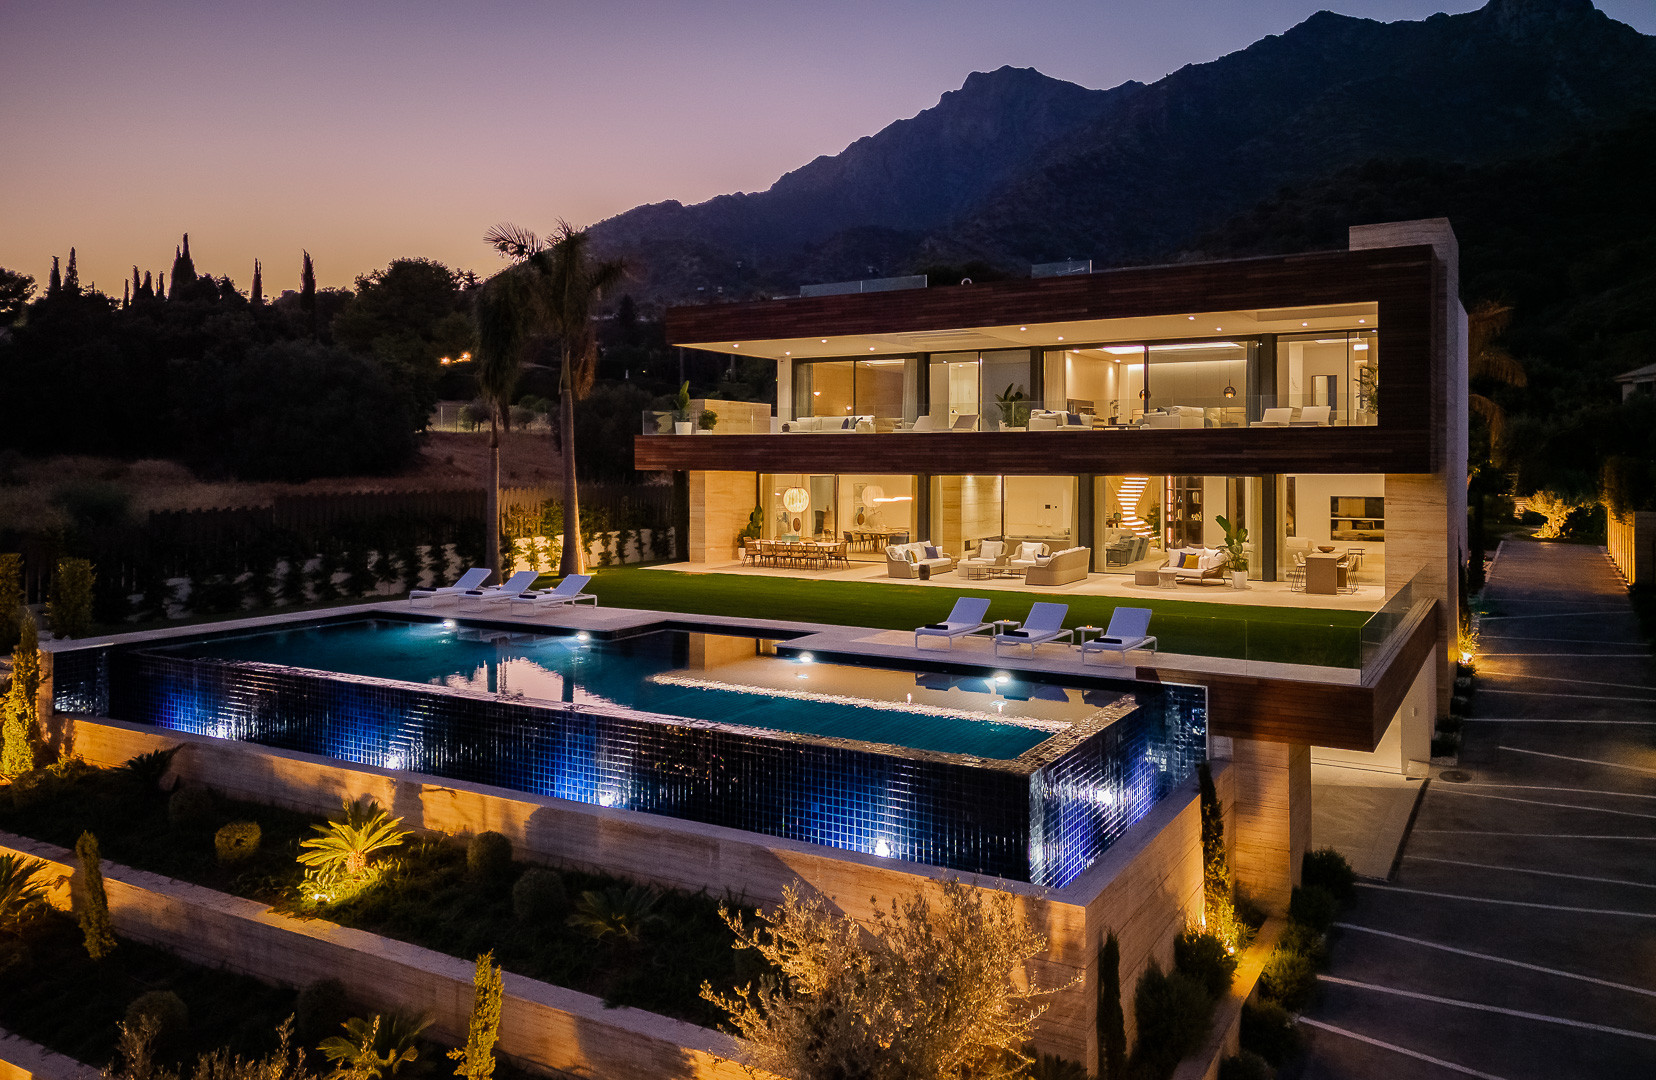 Brand new contemporary design mansion with sea views on the Golden Mile, Marbella